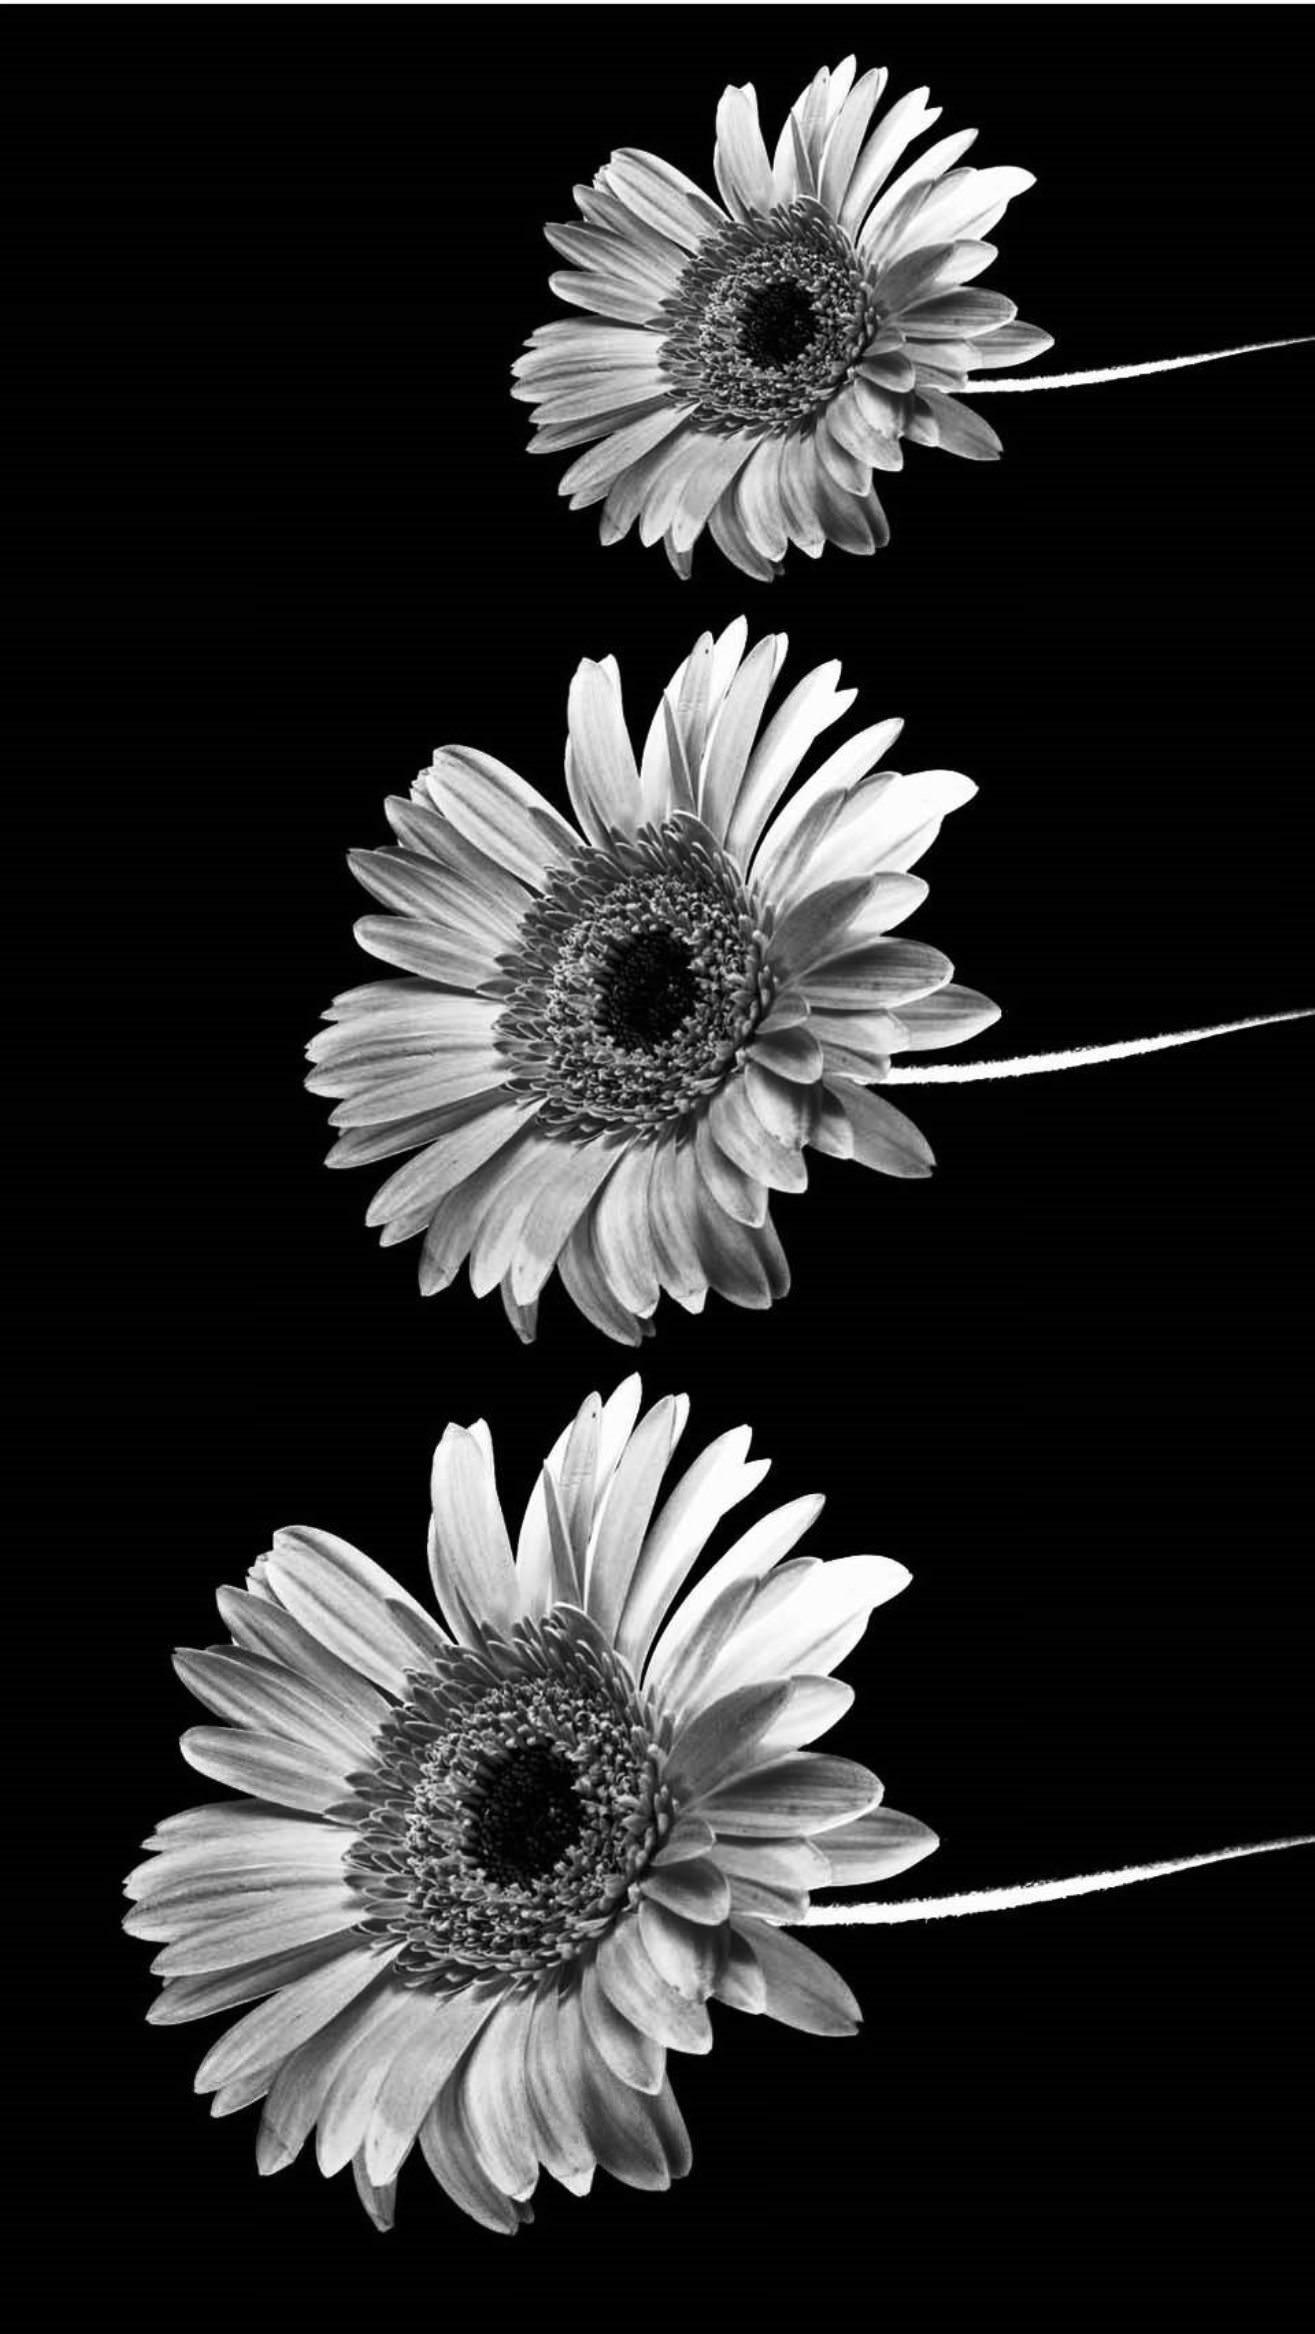 black and white iphone wallpaper tumblr